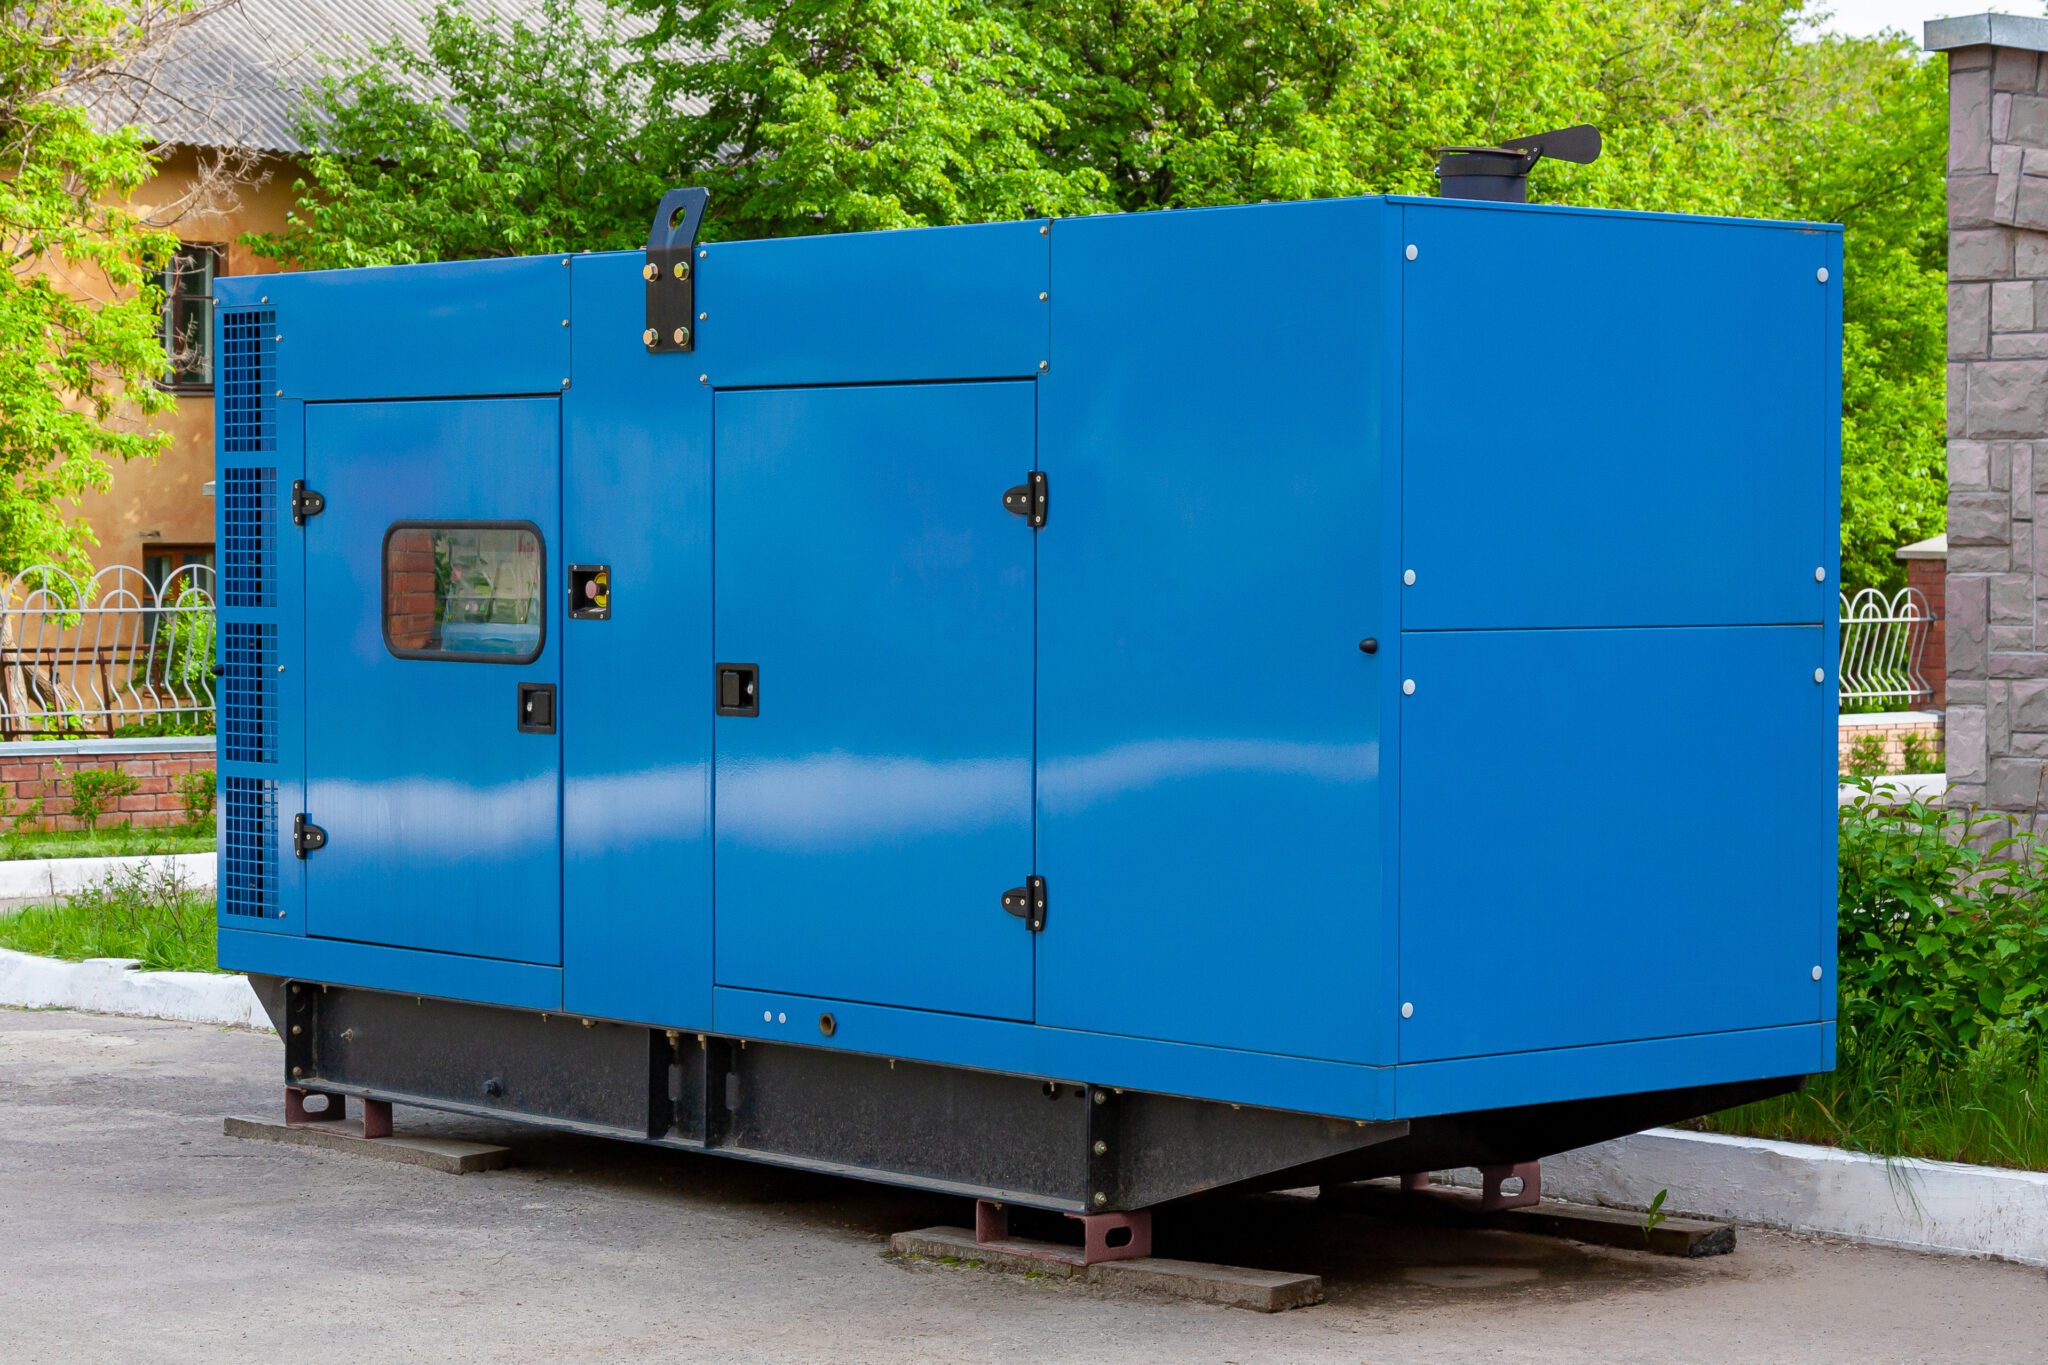 Diesel generator for emergency power supply at the wall of a medical center against the backdrop of green trees in fine weather. Close-up